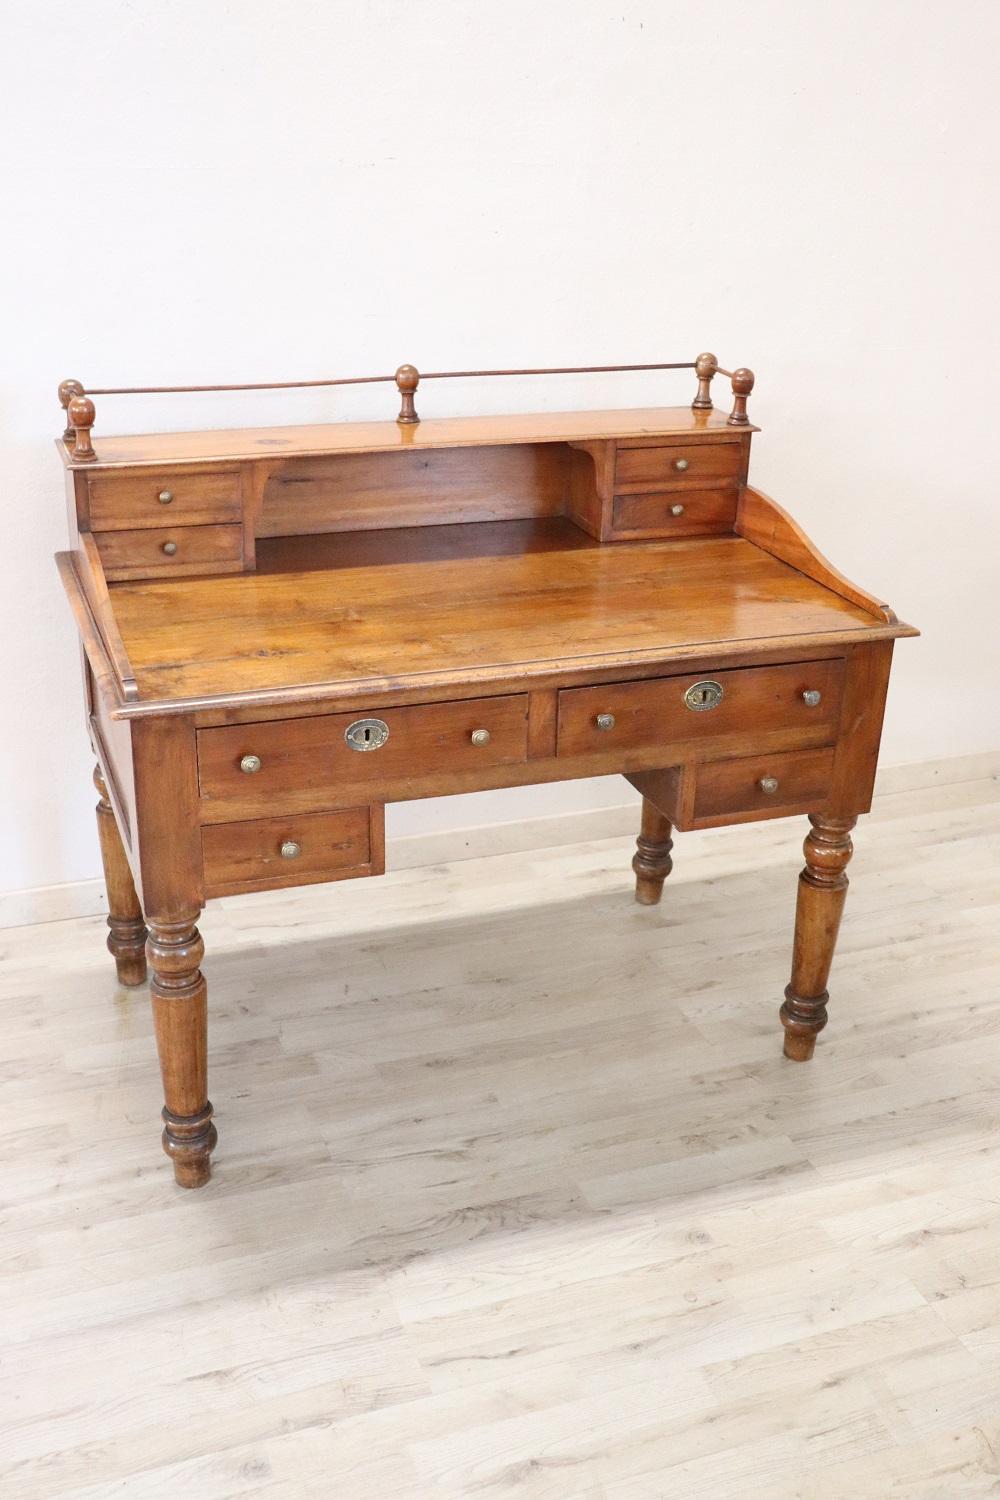 Elegant antique Italian writing desk. Rare and precious solid walnut wood. Comfortable size for a practical use. The desk has elegant turned legs. In the lower part four drawers and in the upper part four smaller drawers. Excellent condition ready